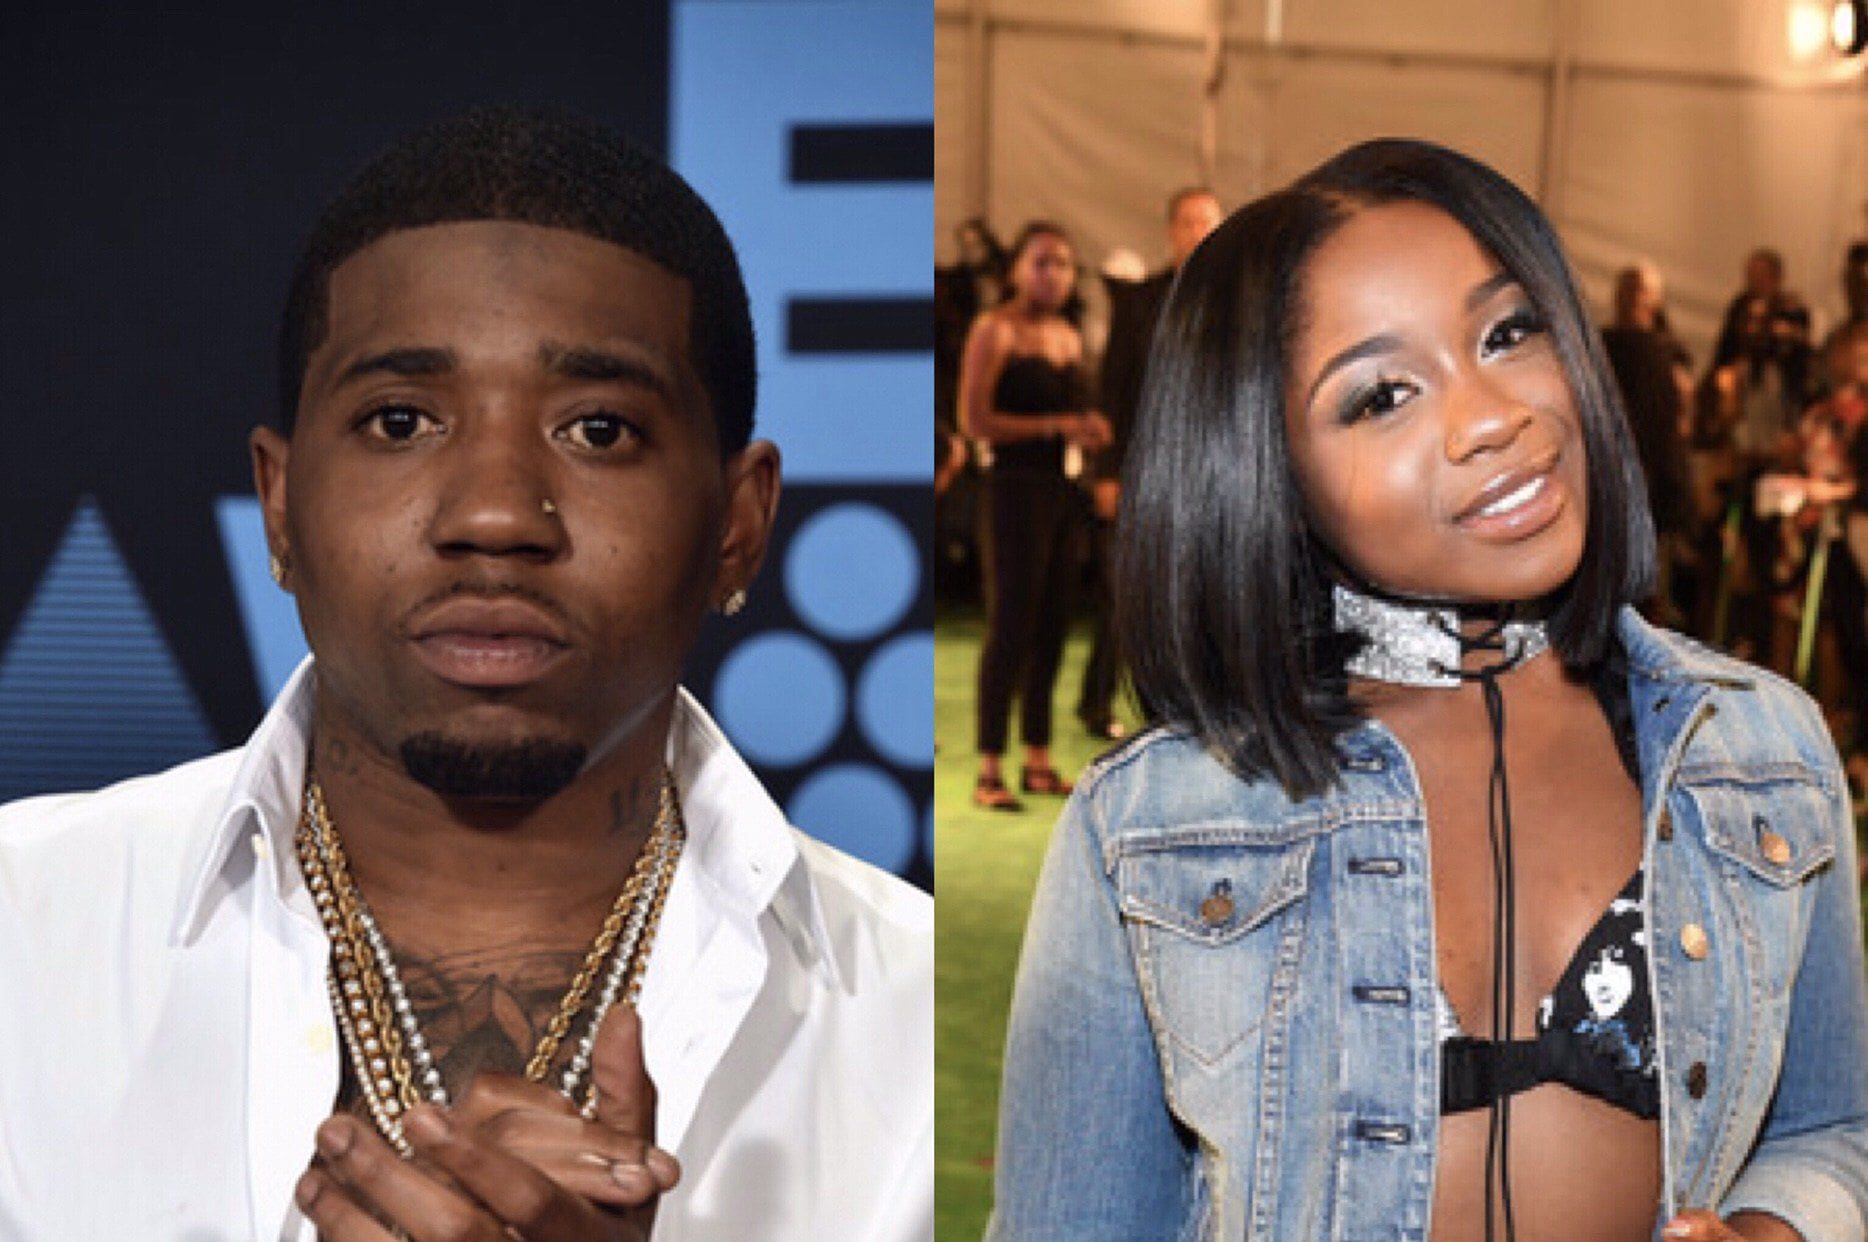 Reginae Carter Updates Fans On YFN Lucci's Situation Following His Arrest